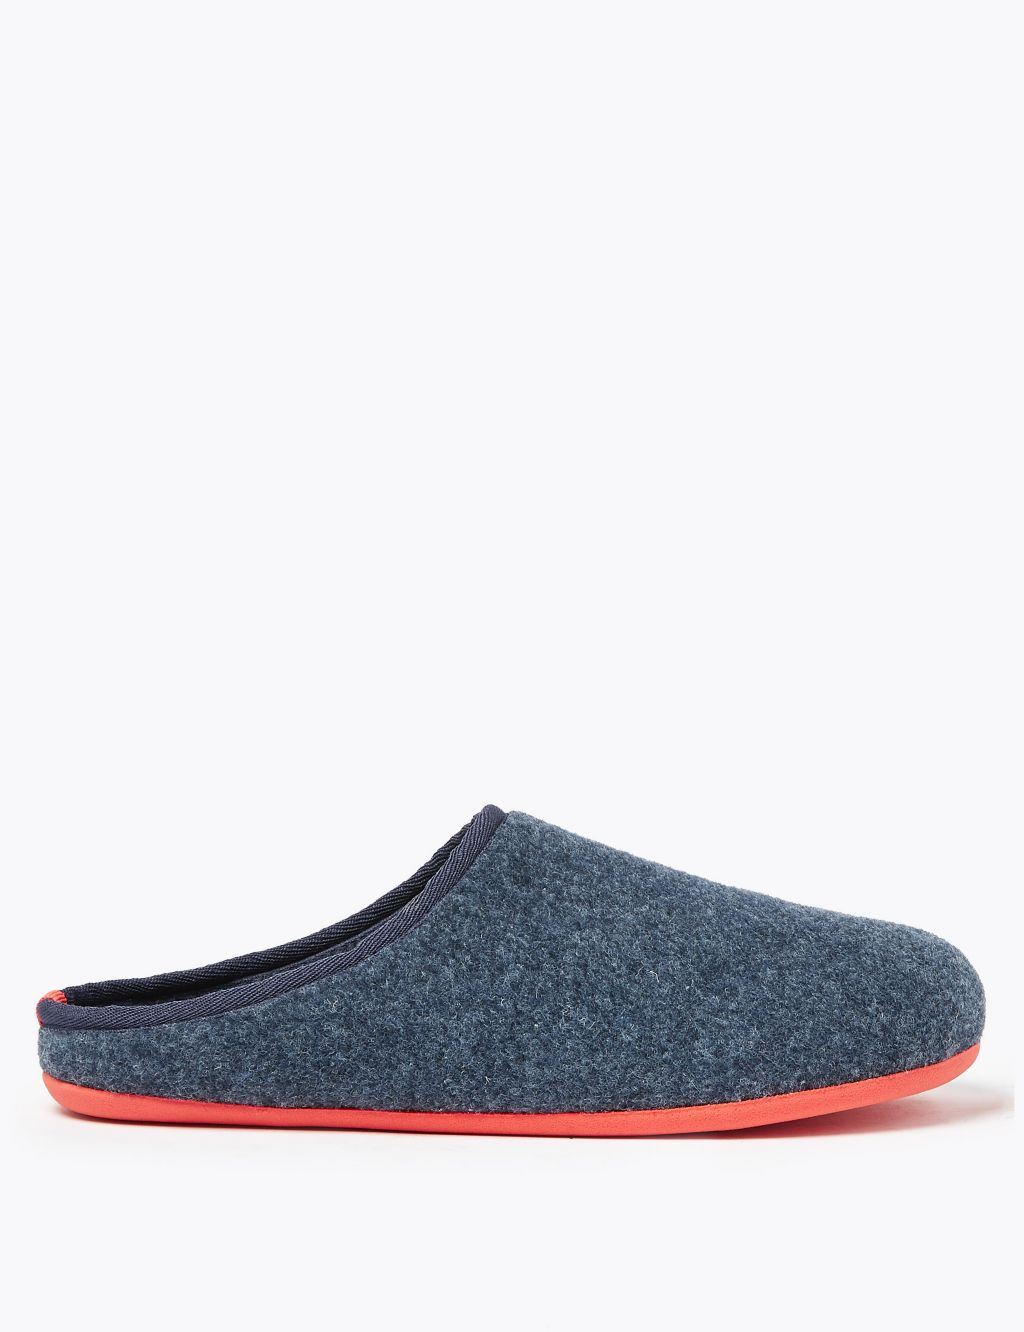 Felt Mule Slippers | M&S Collection | M&S